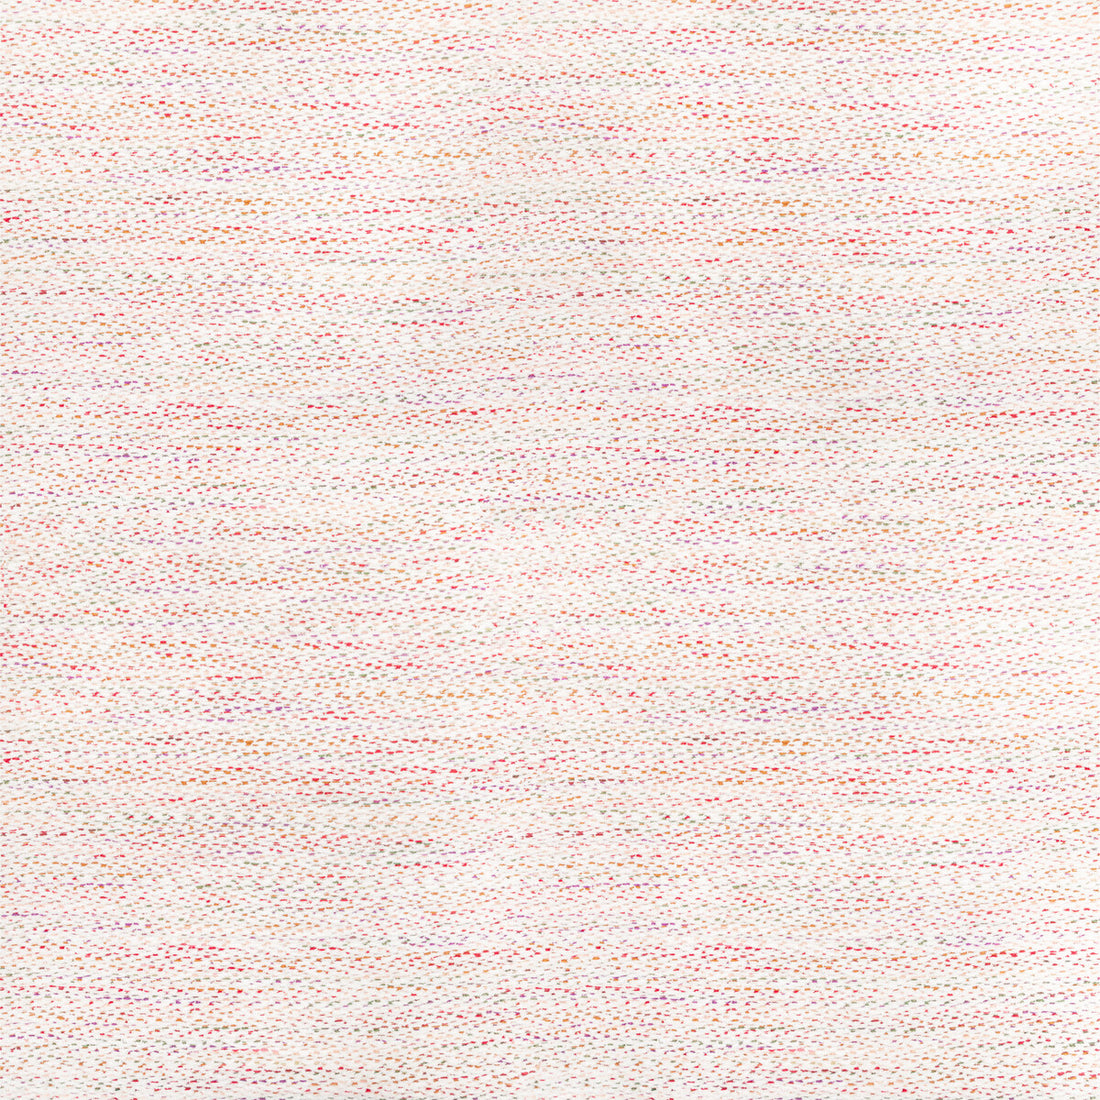 Roberty Texture fabric in confetti color - pattern 8022127.1617.0 - by Brunschwig &amp; Fils in the Chambery Textures III collection